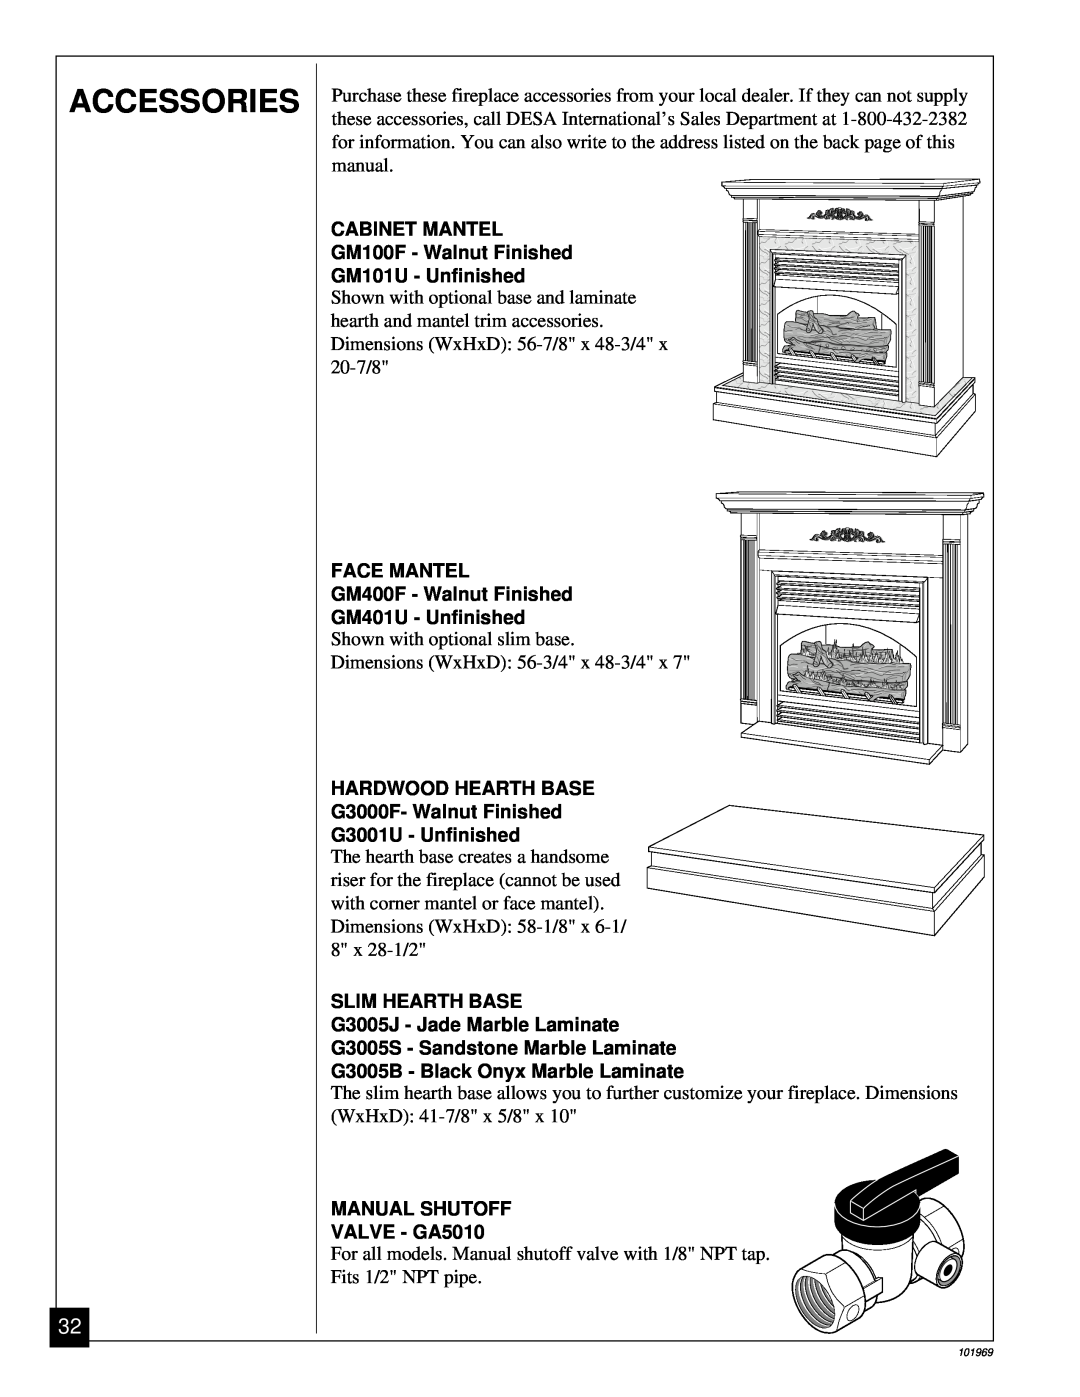 Desa UNVENTED (VENT-FREE) PROPANE GAS FIREPLACE installation manual Accessories 